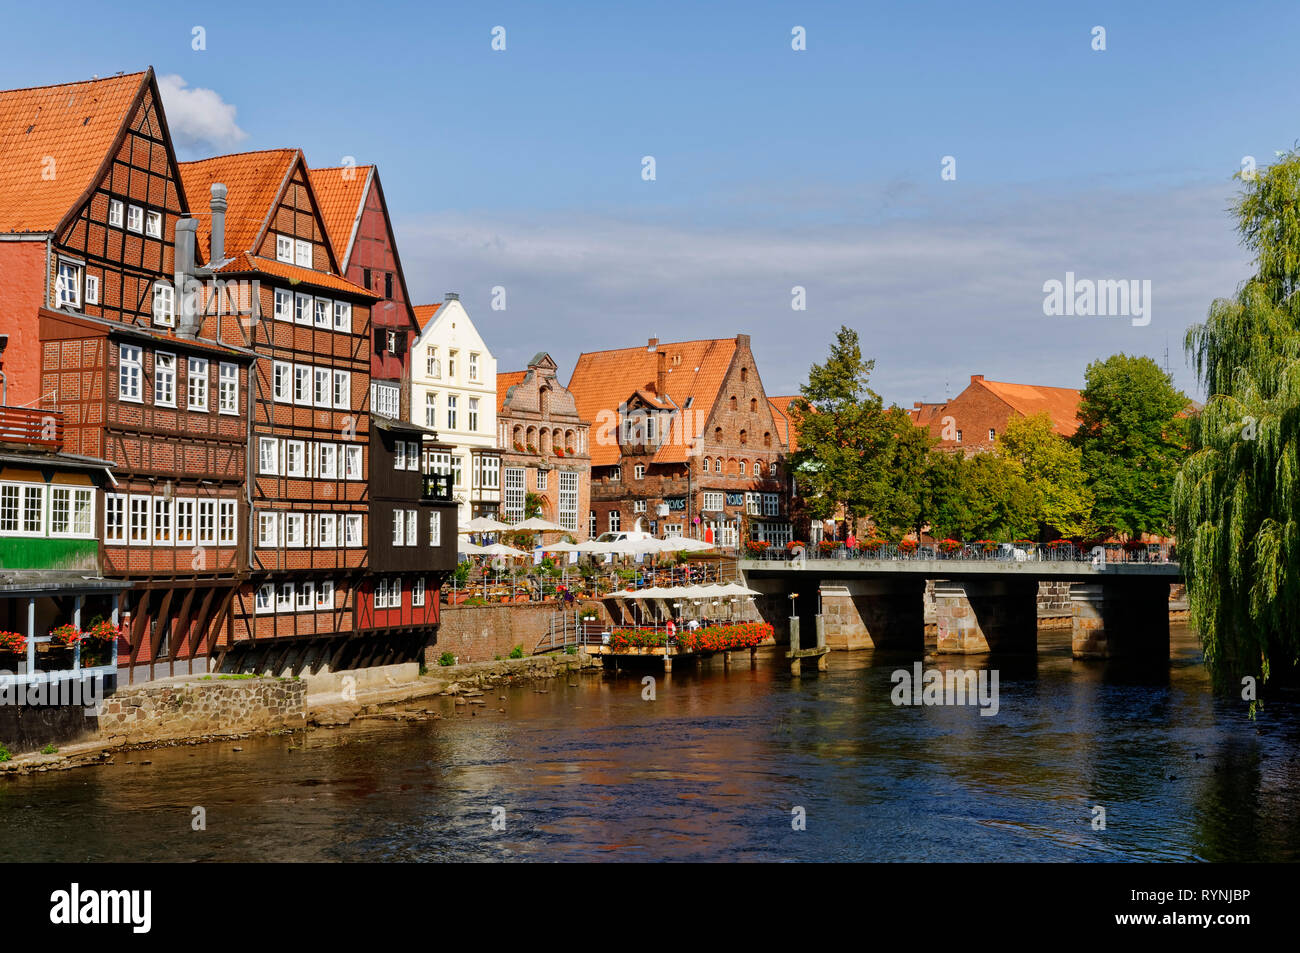 Lüneburg: Houses in old town along the river Ilmenau (Waterside Quarter), Lower Saxony, Germany Stock Photo